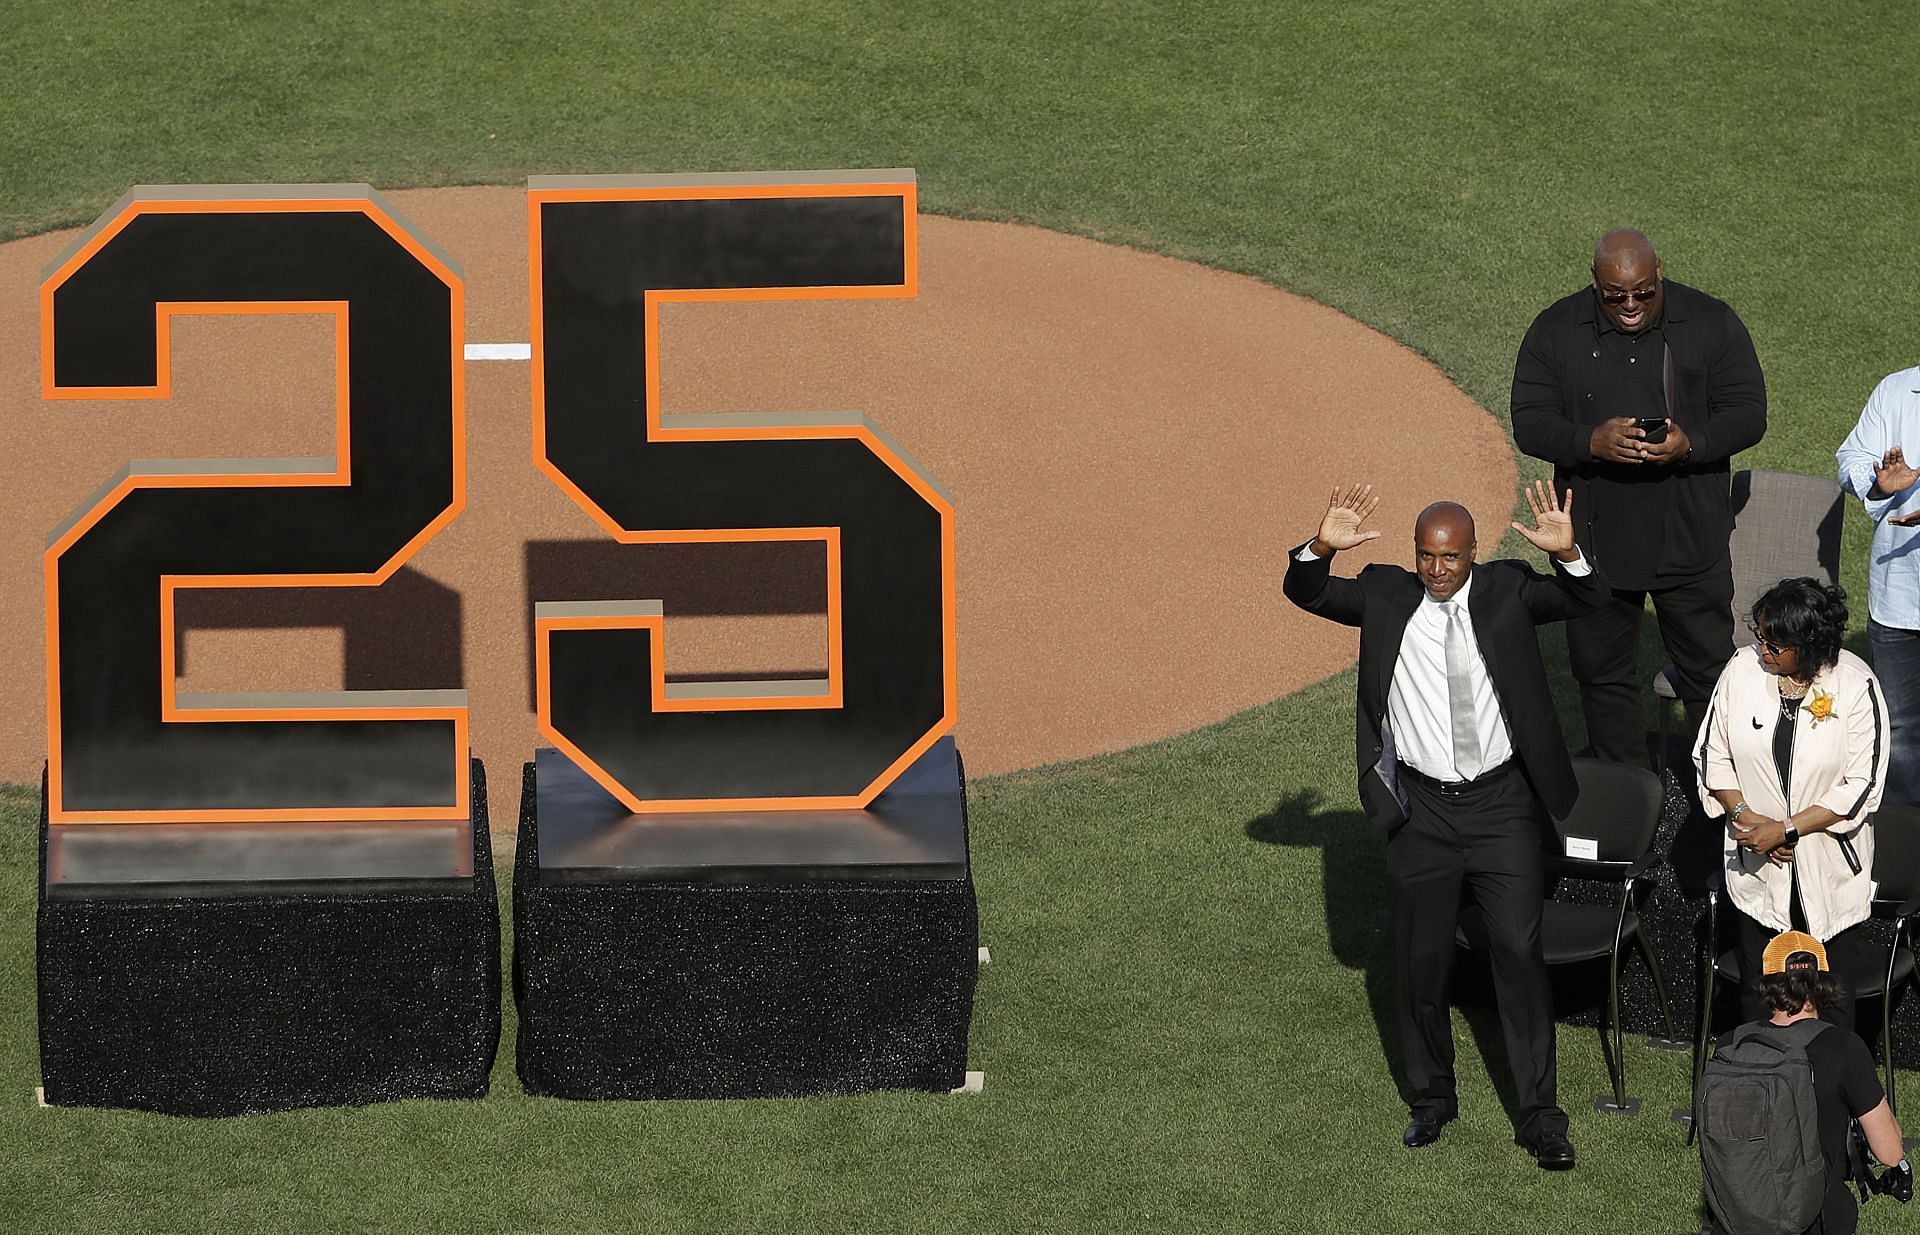 Of course Barry Bonds belongs in the Hall of Fame – New York Daily News